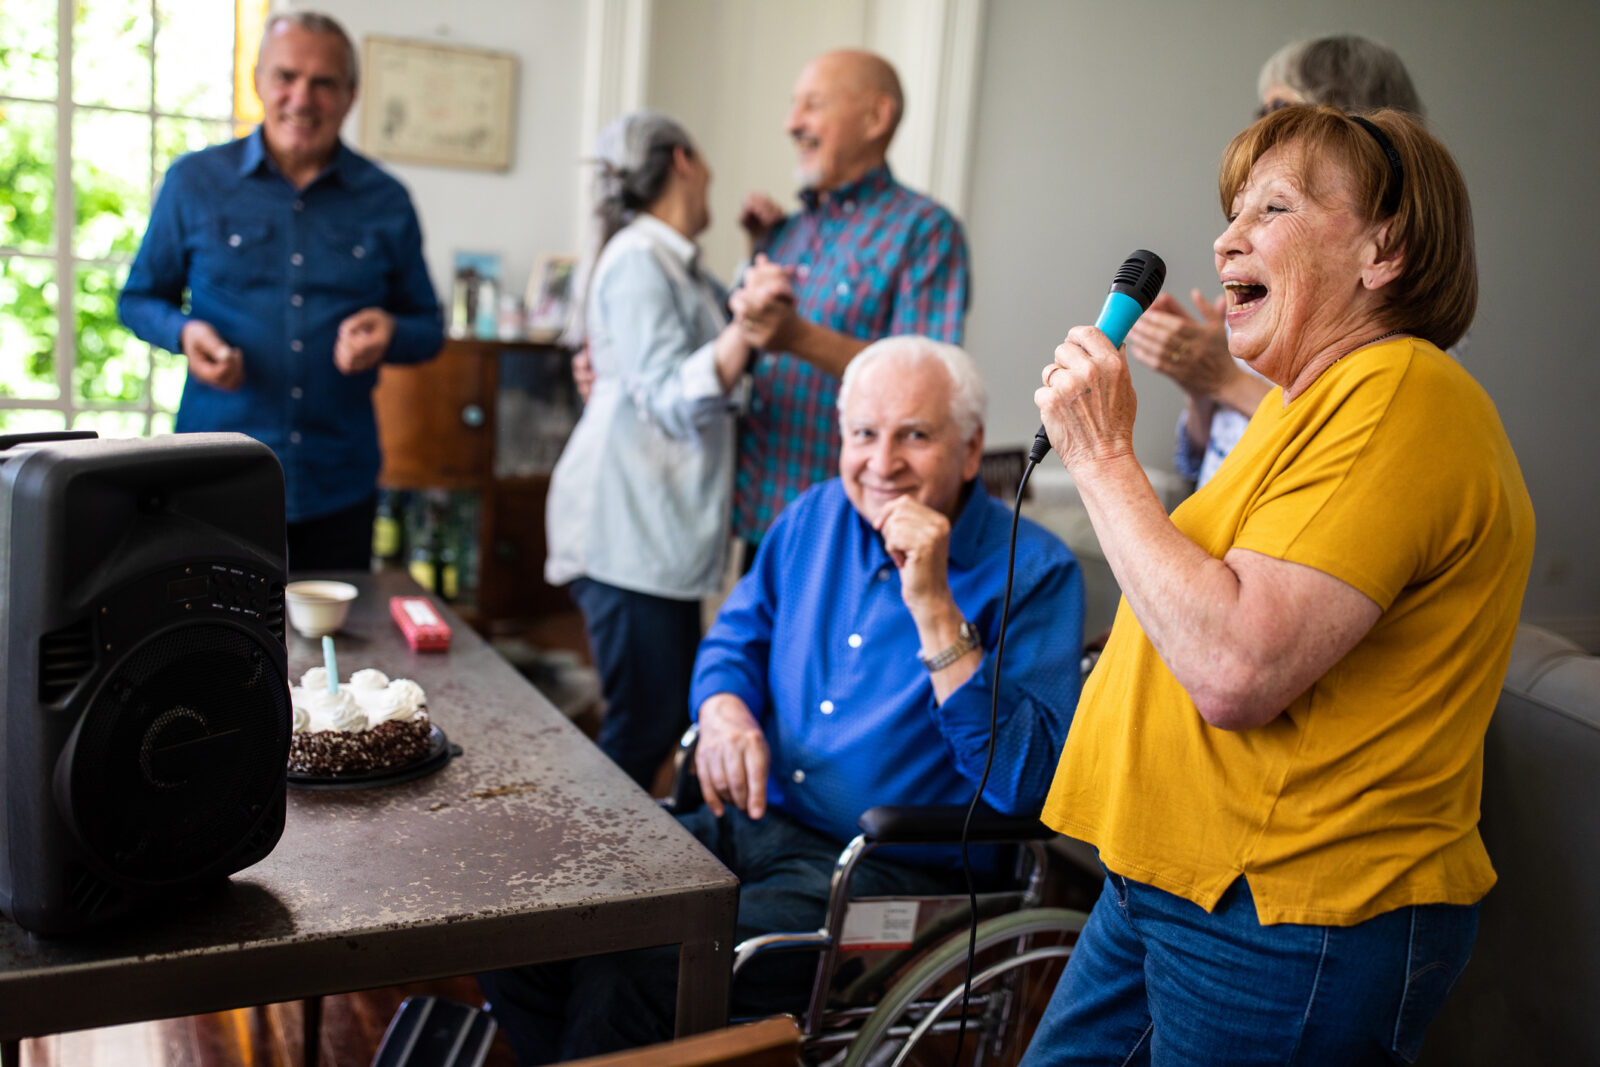 Group of Senior people having fun at Karaoke party, celebrating birthday in shared community space